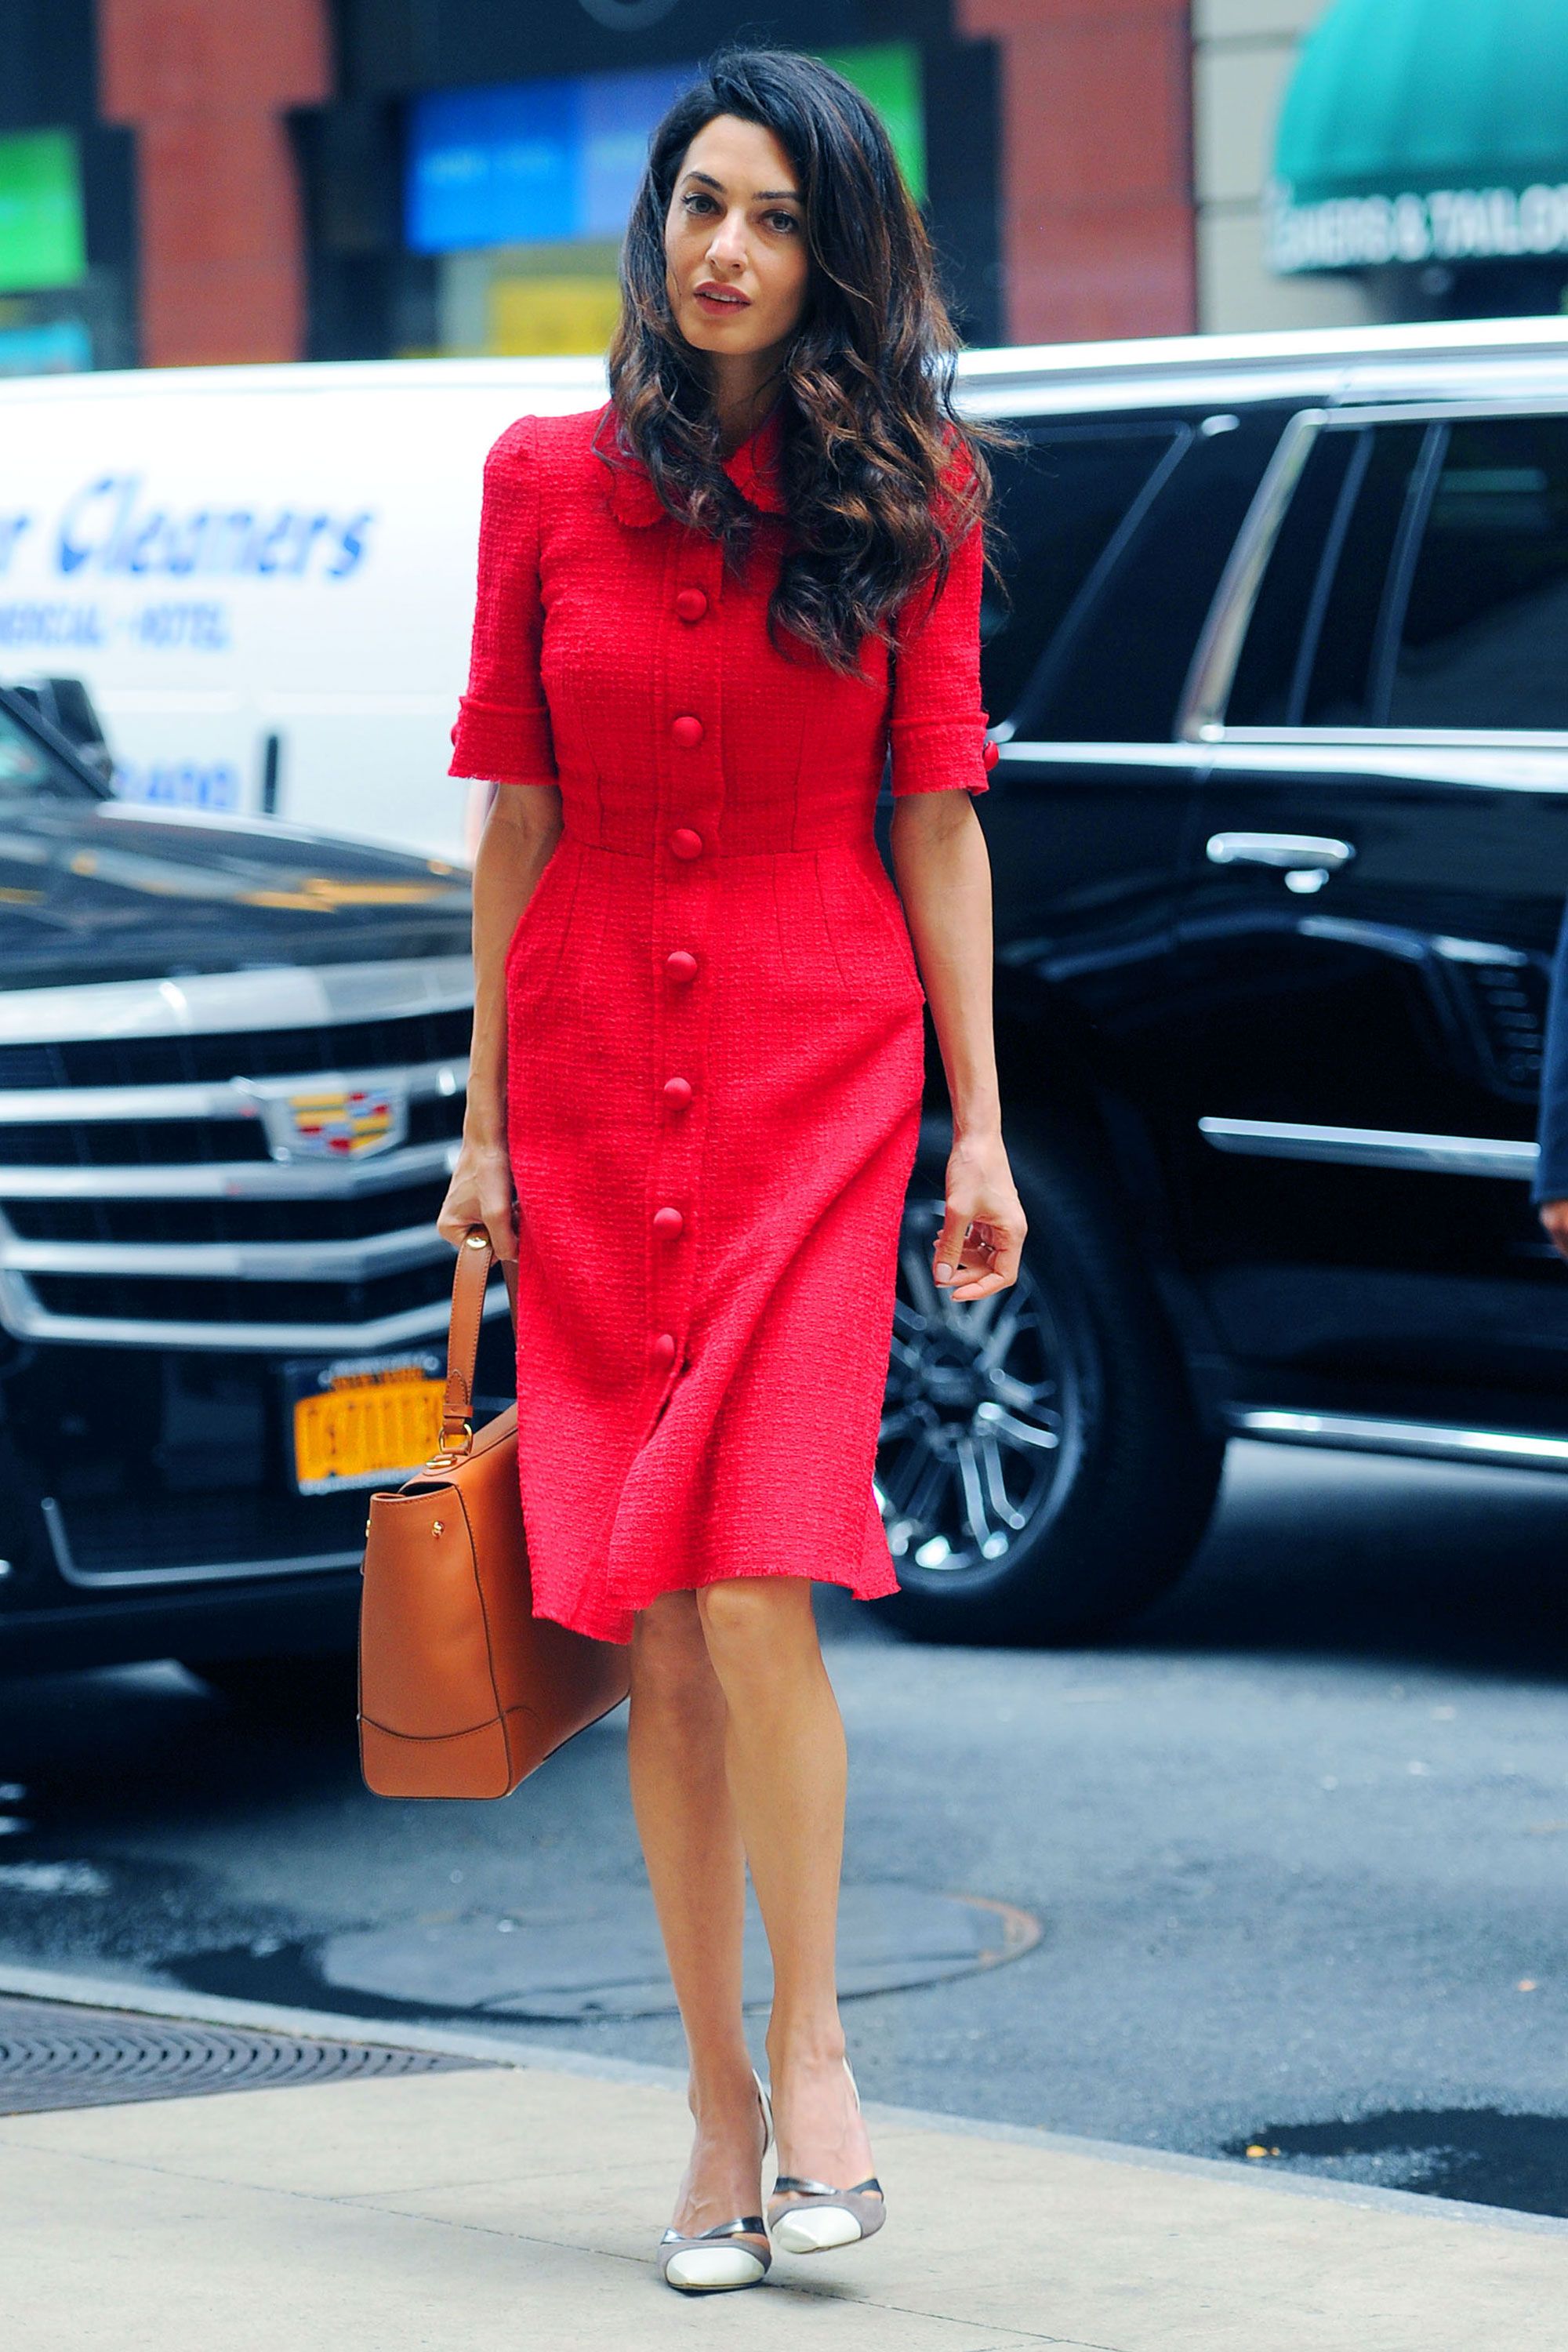 Take an Office Style Lesson from Amal Clooney and Her Handbags